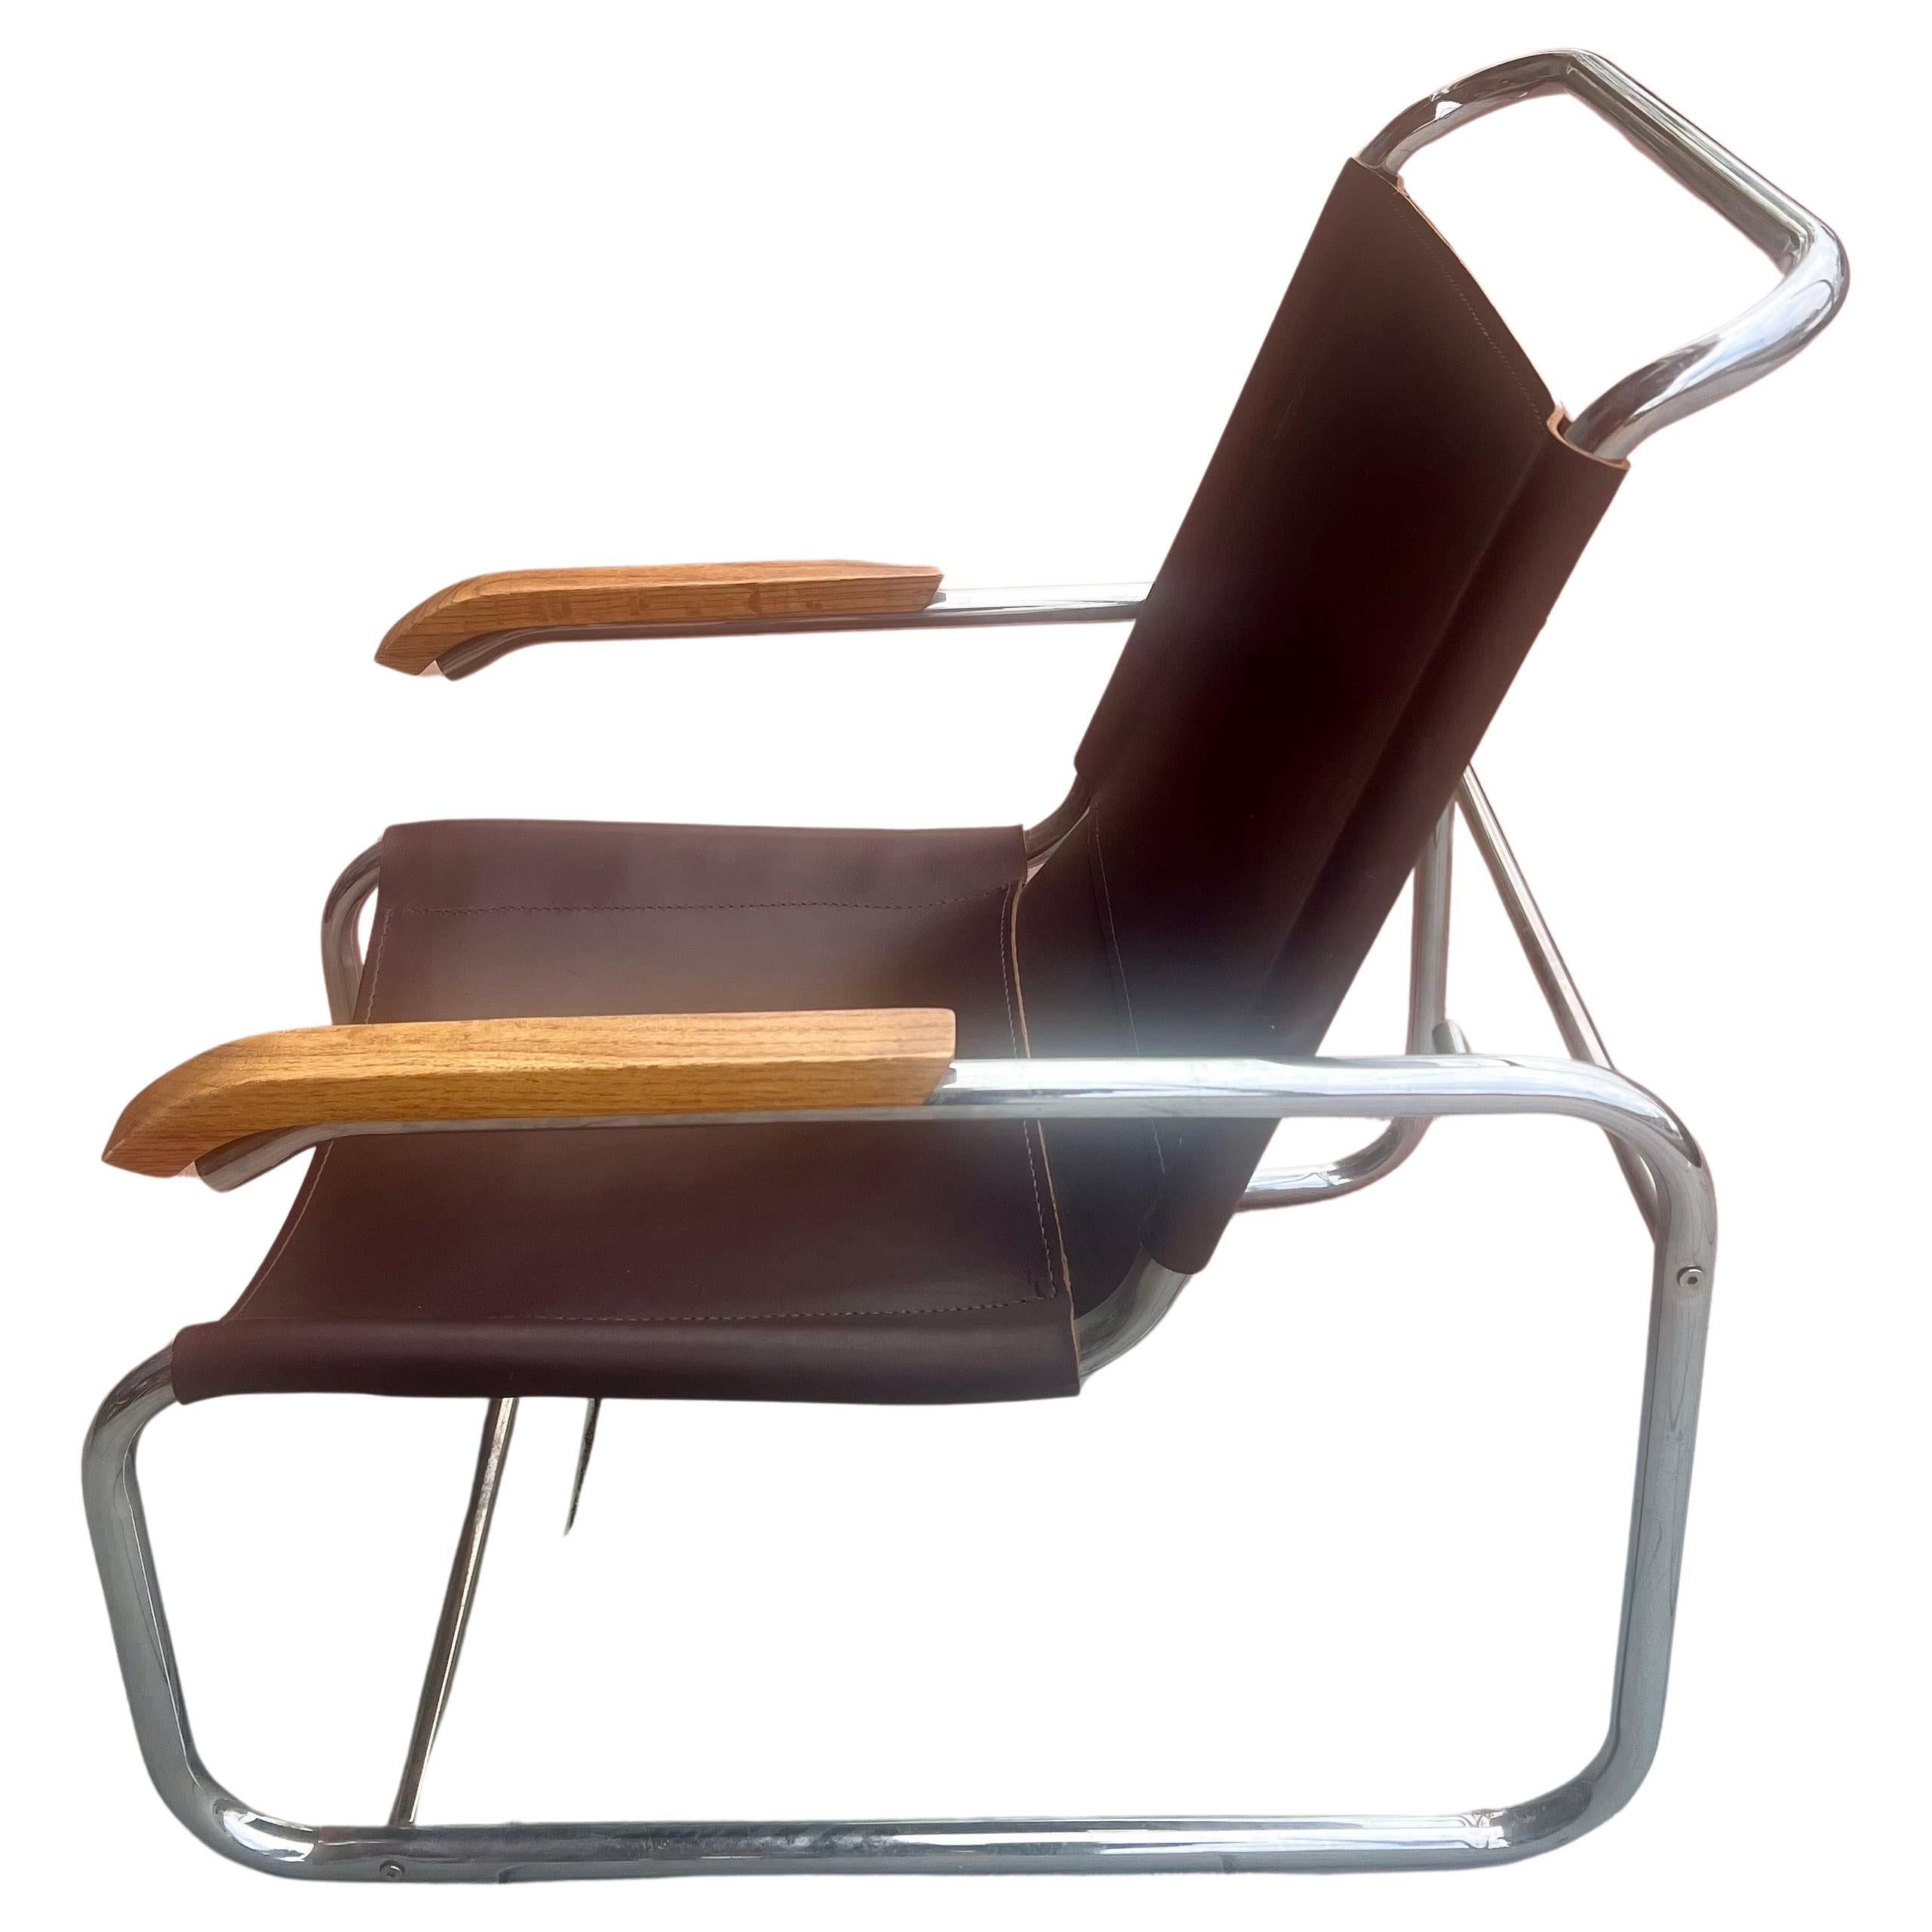 Original 1960s cantilever Marcel Breuer B35 brown leather lounge chair with oak wood arm rests. Leather and chrome completly redone . The comfiest and most stylish chair you will ever sit in. The chair was rechromed we put new leathe and have the